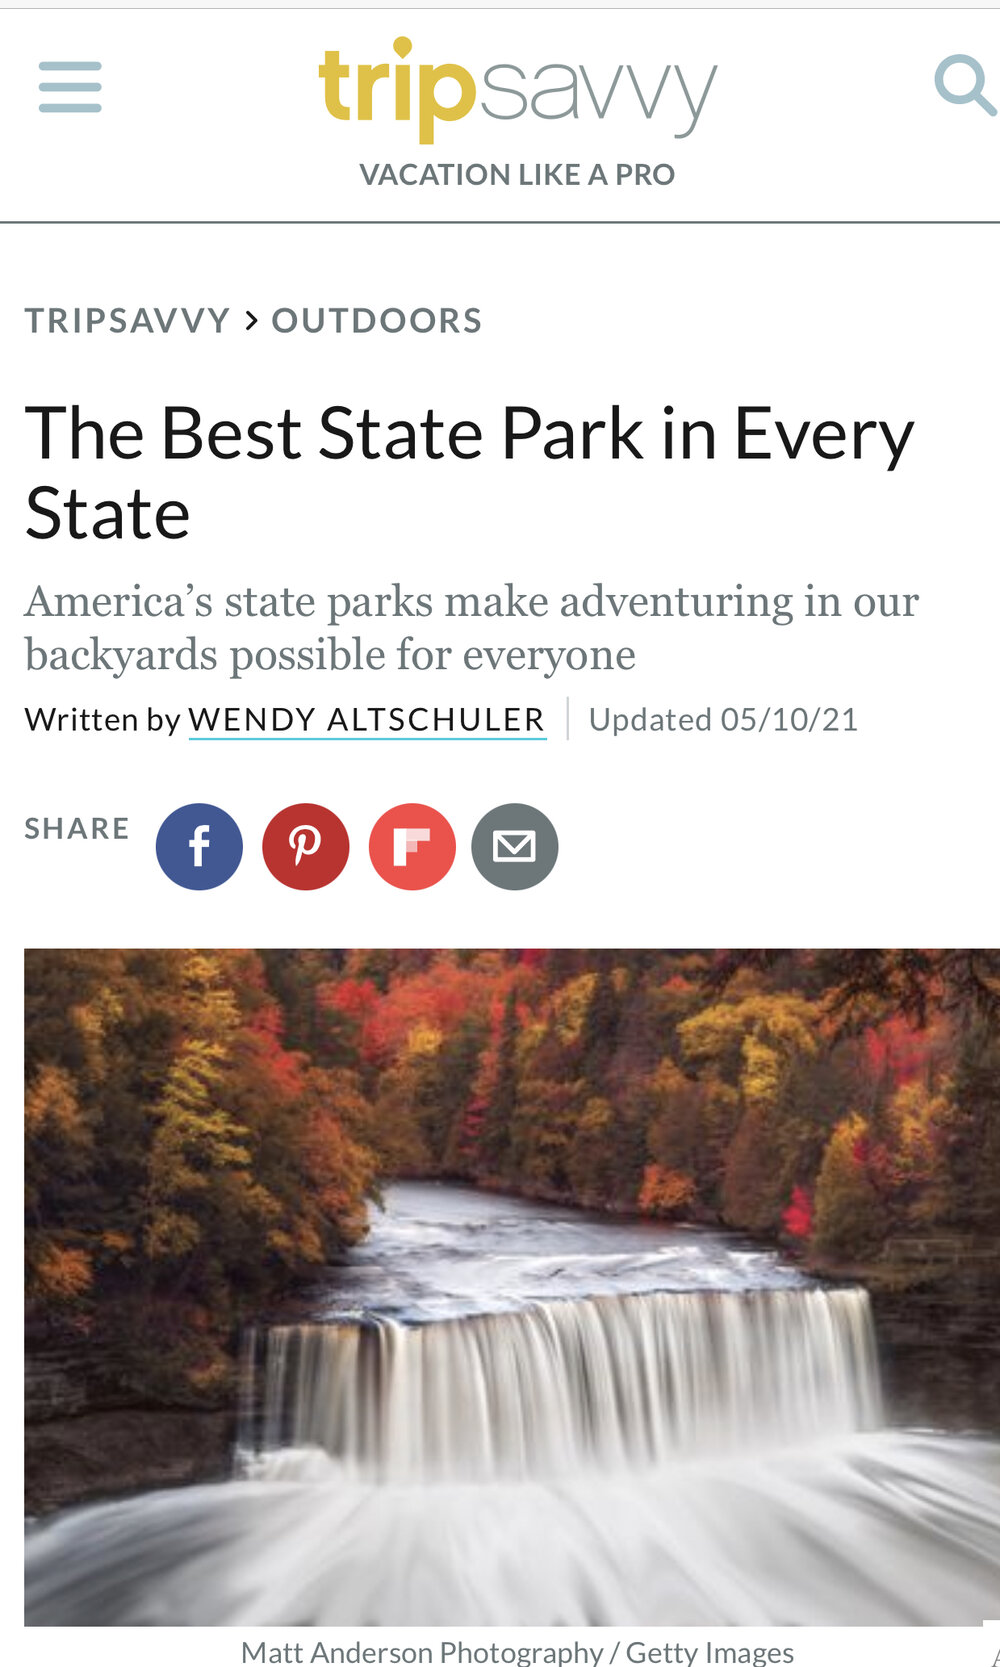 The Best State Park in Every State